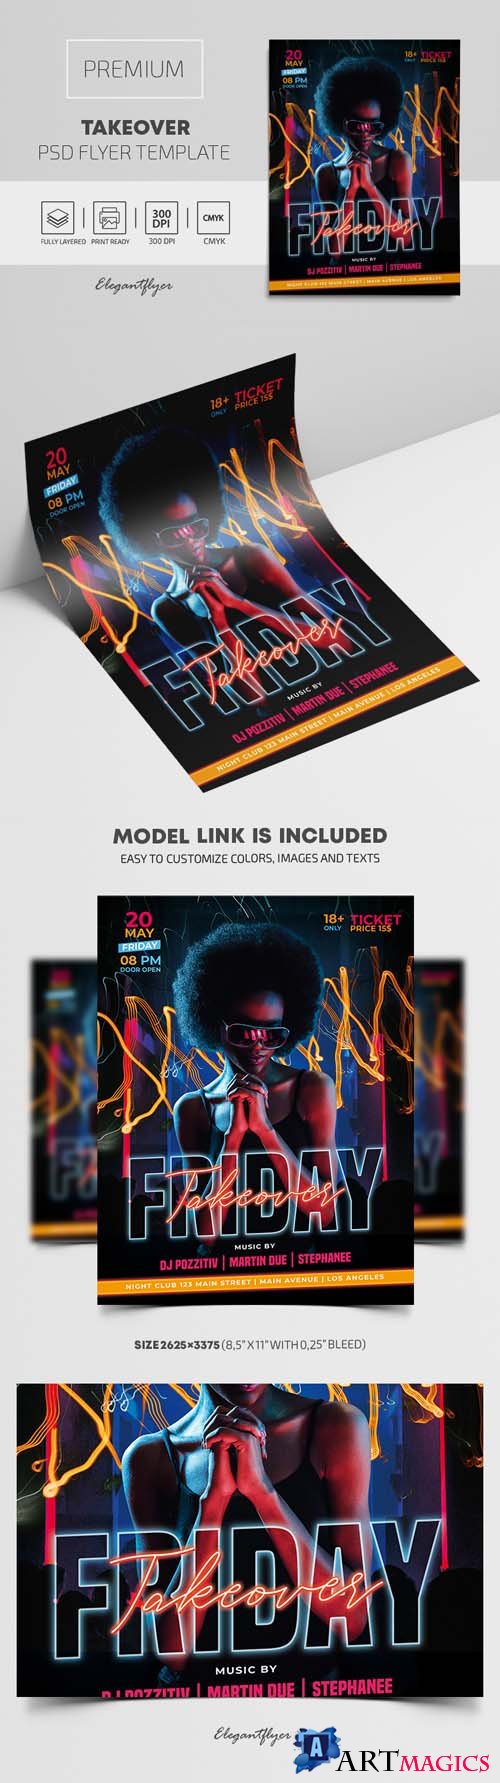 Friday Takeover Party Premium PSD Flyer Template